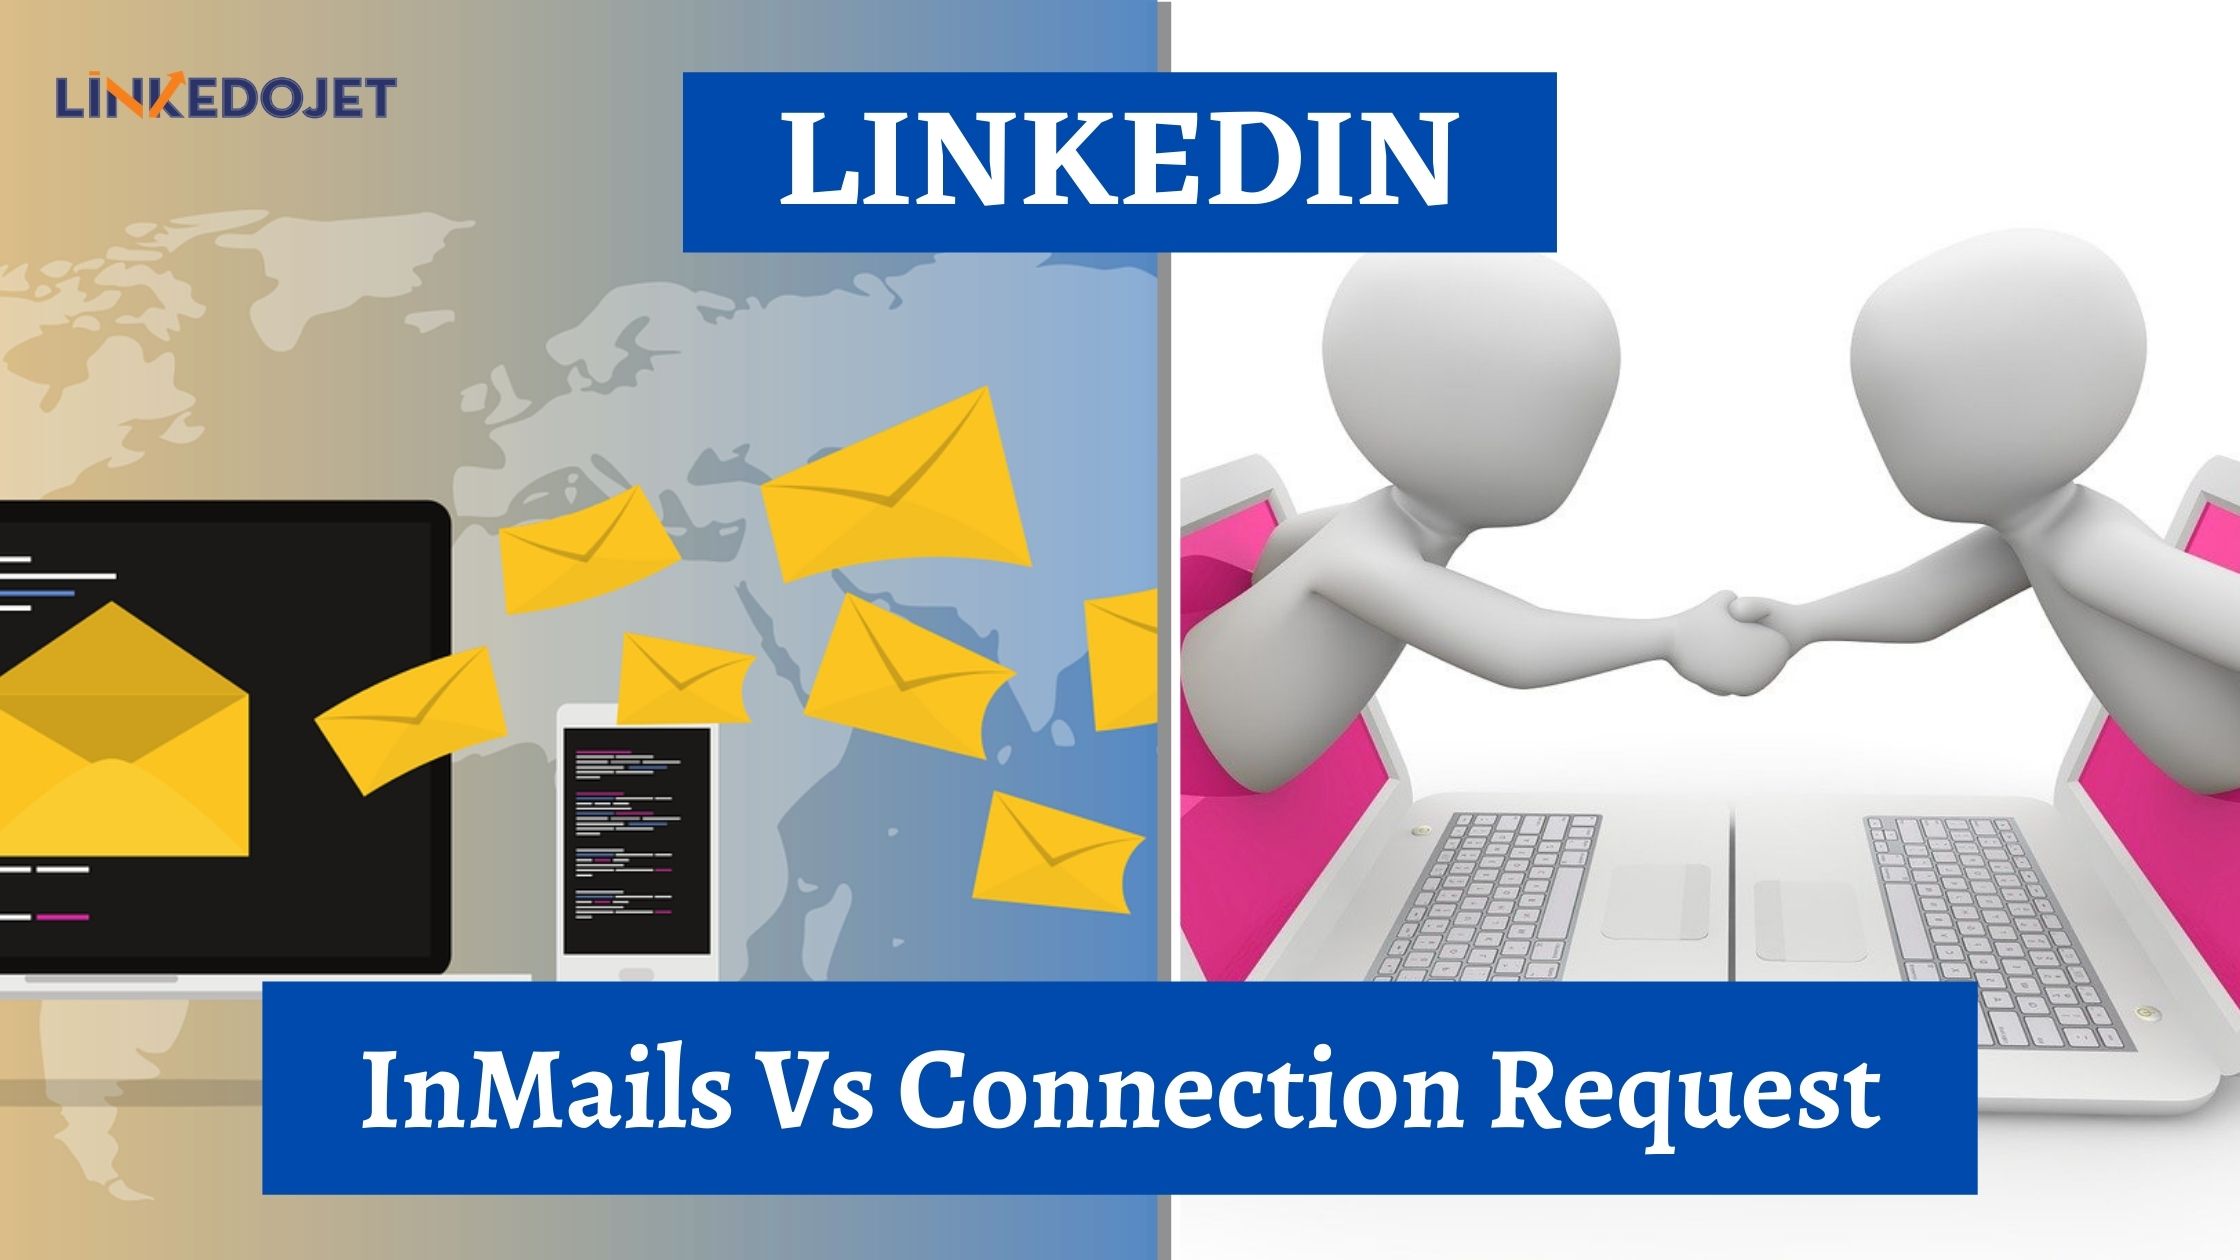 linkedin-inmail-vs-connection-request